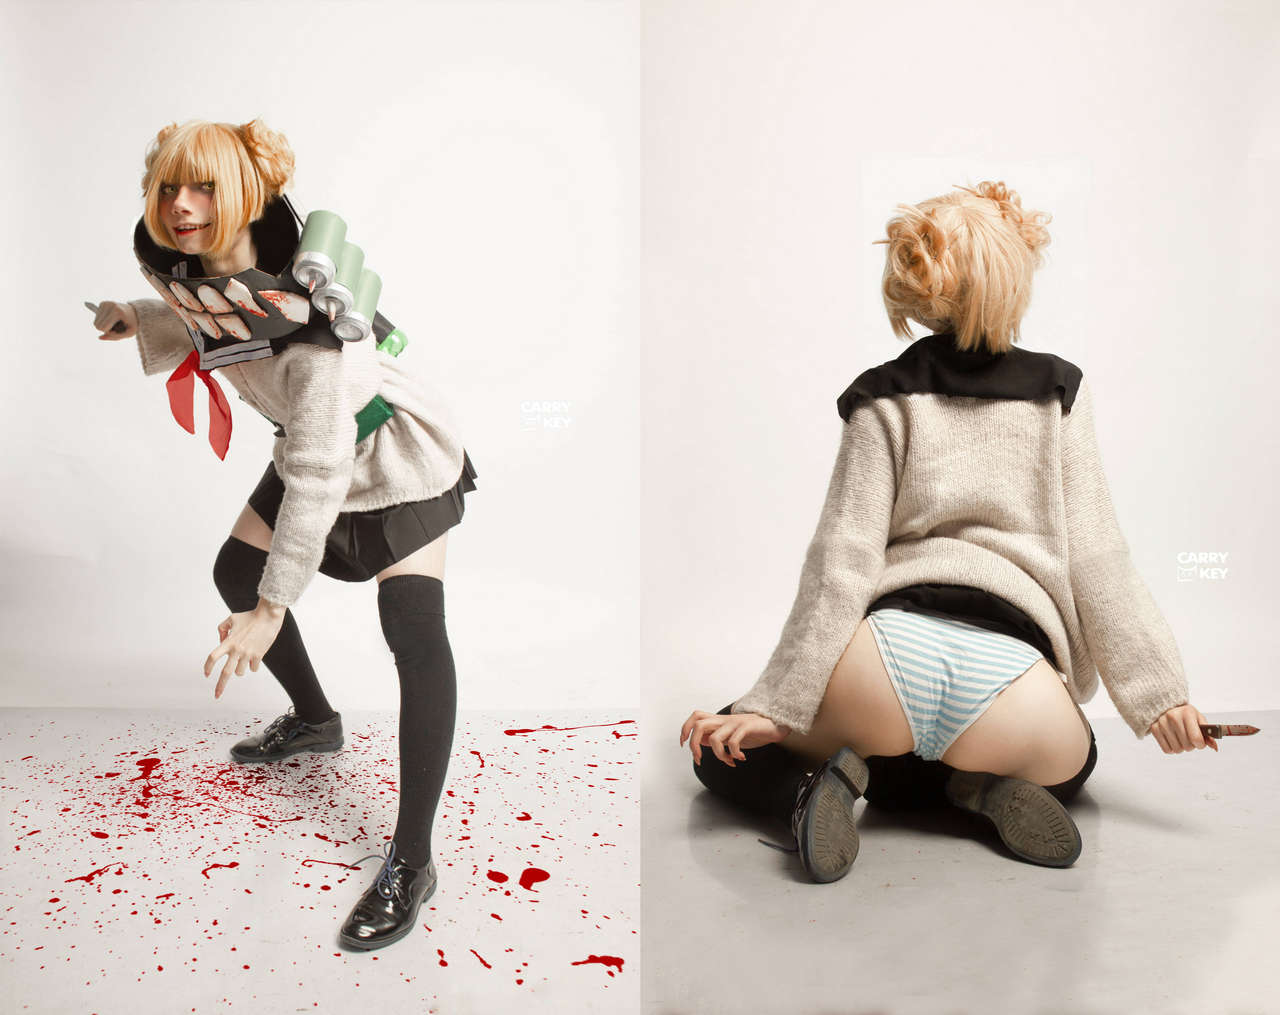 Toga Himiko By Carryke